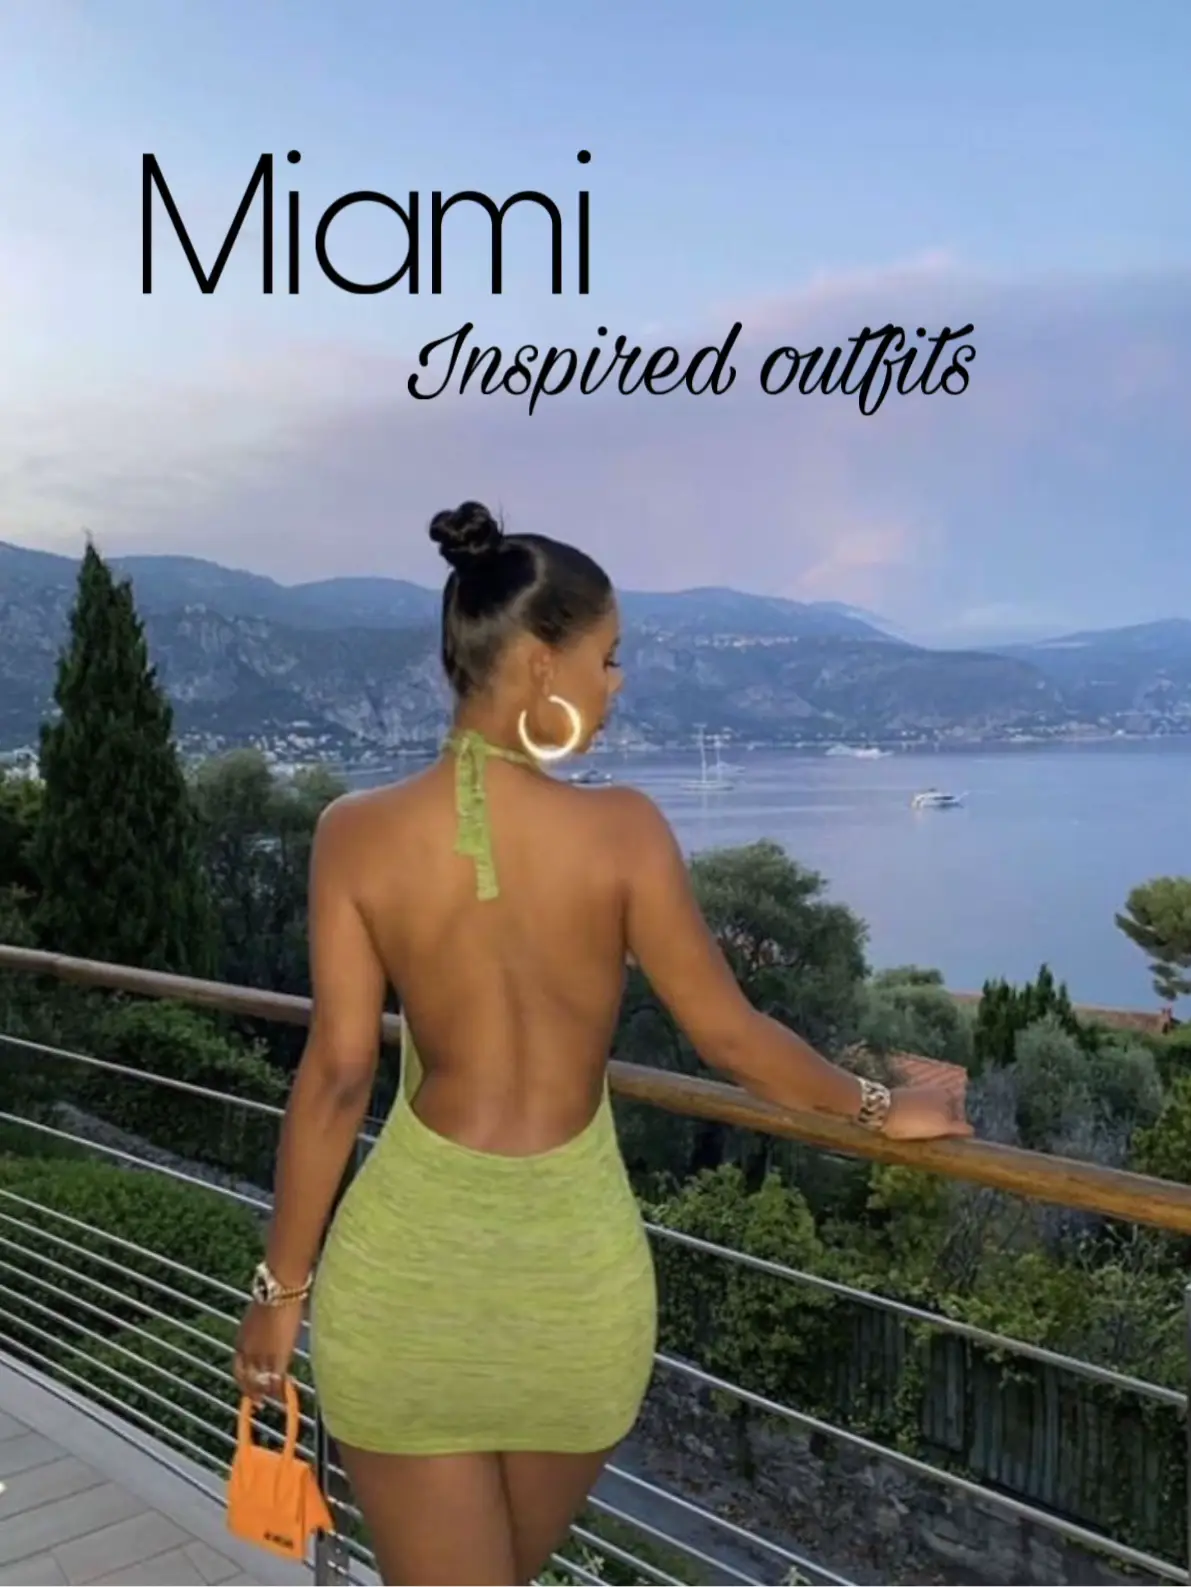 Black Sheer Mesh Short Sleeve Bodysuit Ruched Skirt Two Piece Set - Hot  Miami Styles